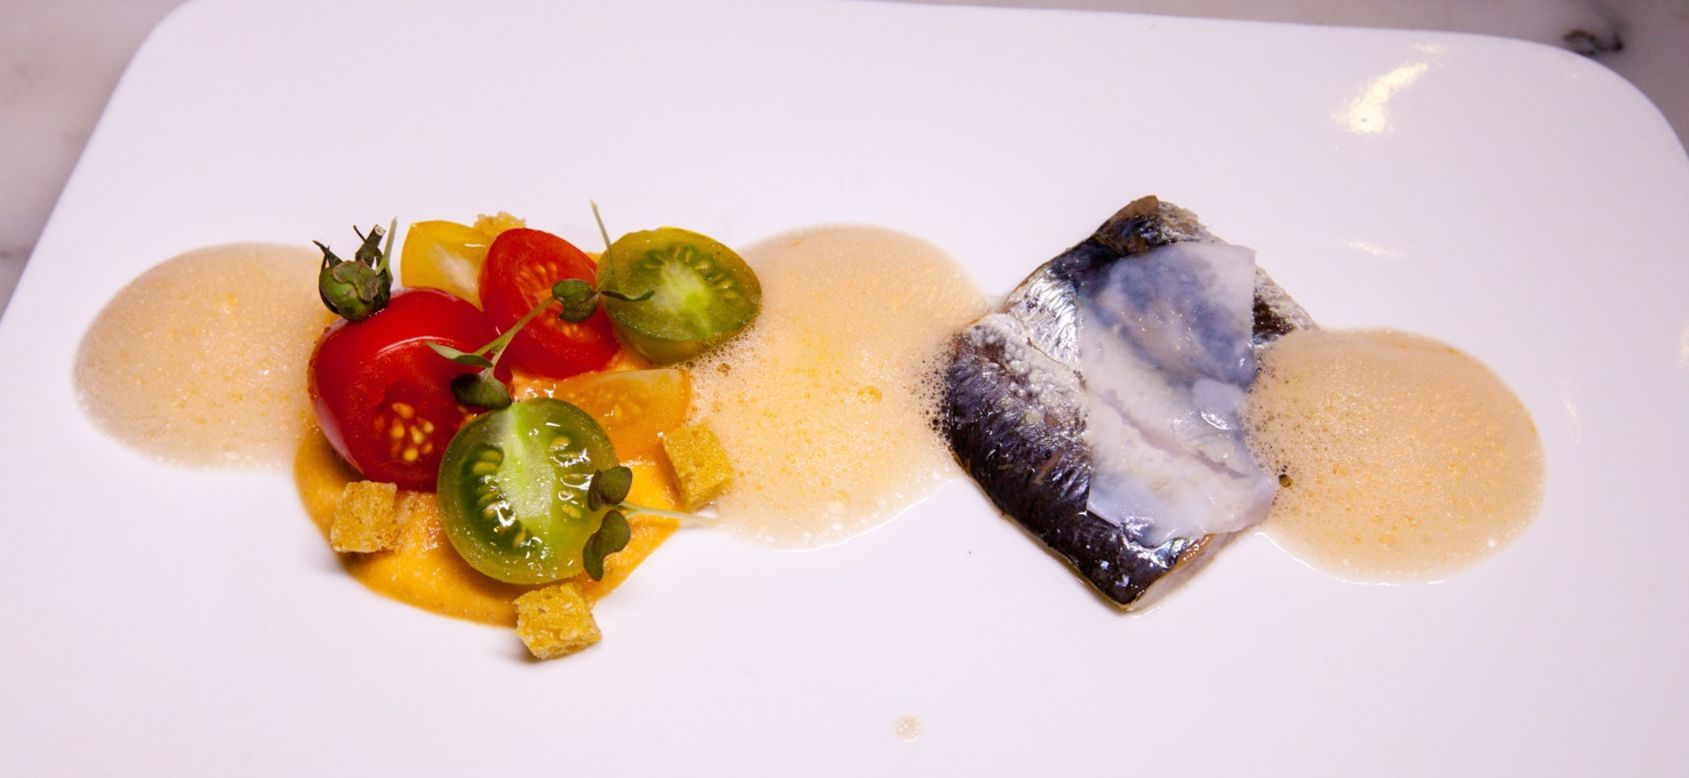 <strong>The dish: </strong>Roasted sardine with Colonnata lard and tomato, by Rodrigues, executive chef at the Michelin-starred Feitoria restaurant. <br /><br />Think your own festival food snaps are just as Instagram-worthy? <br /><br />Check out the <a href="http://worldgourmetfestivalbangkok.wordpress.com/mywgf-photo-contest/" target="_blank" target="_blank">World Gourmet Festival's #MyWGF Instagram Photo Contest</a>. <br /><br /><em>Text by CNN's Karla Cripps.</em>